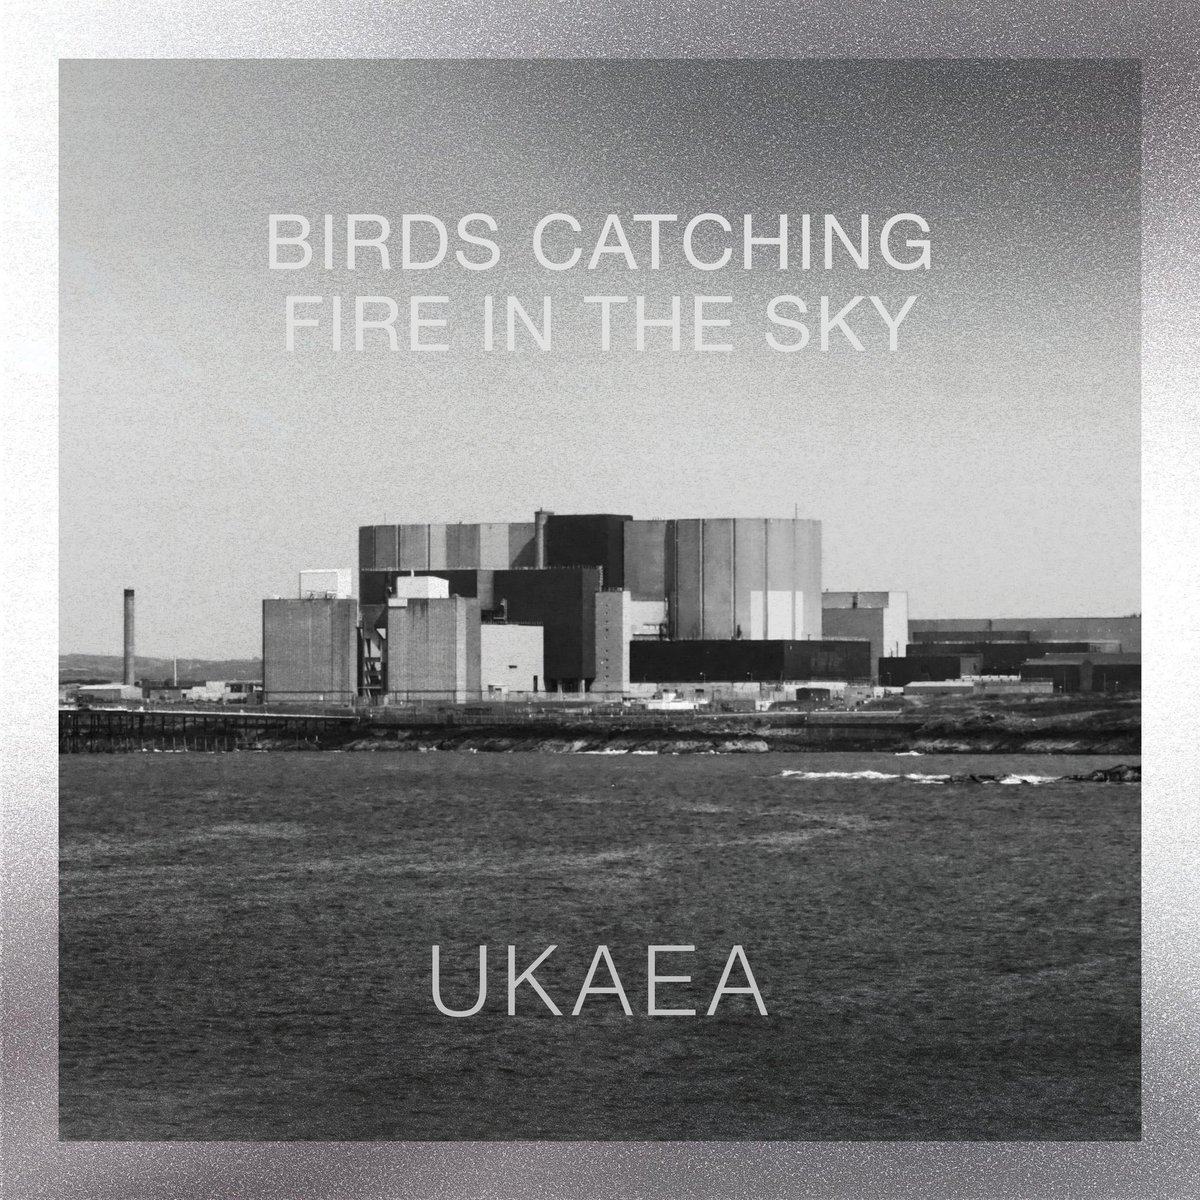 Looking forward to seeing UKAEA at Acid Horse, so I’ve been playing this a lot… wonderful stuff